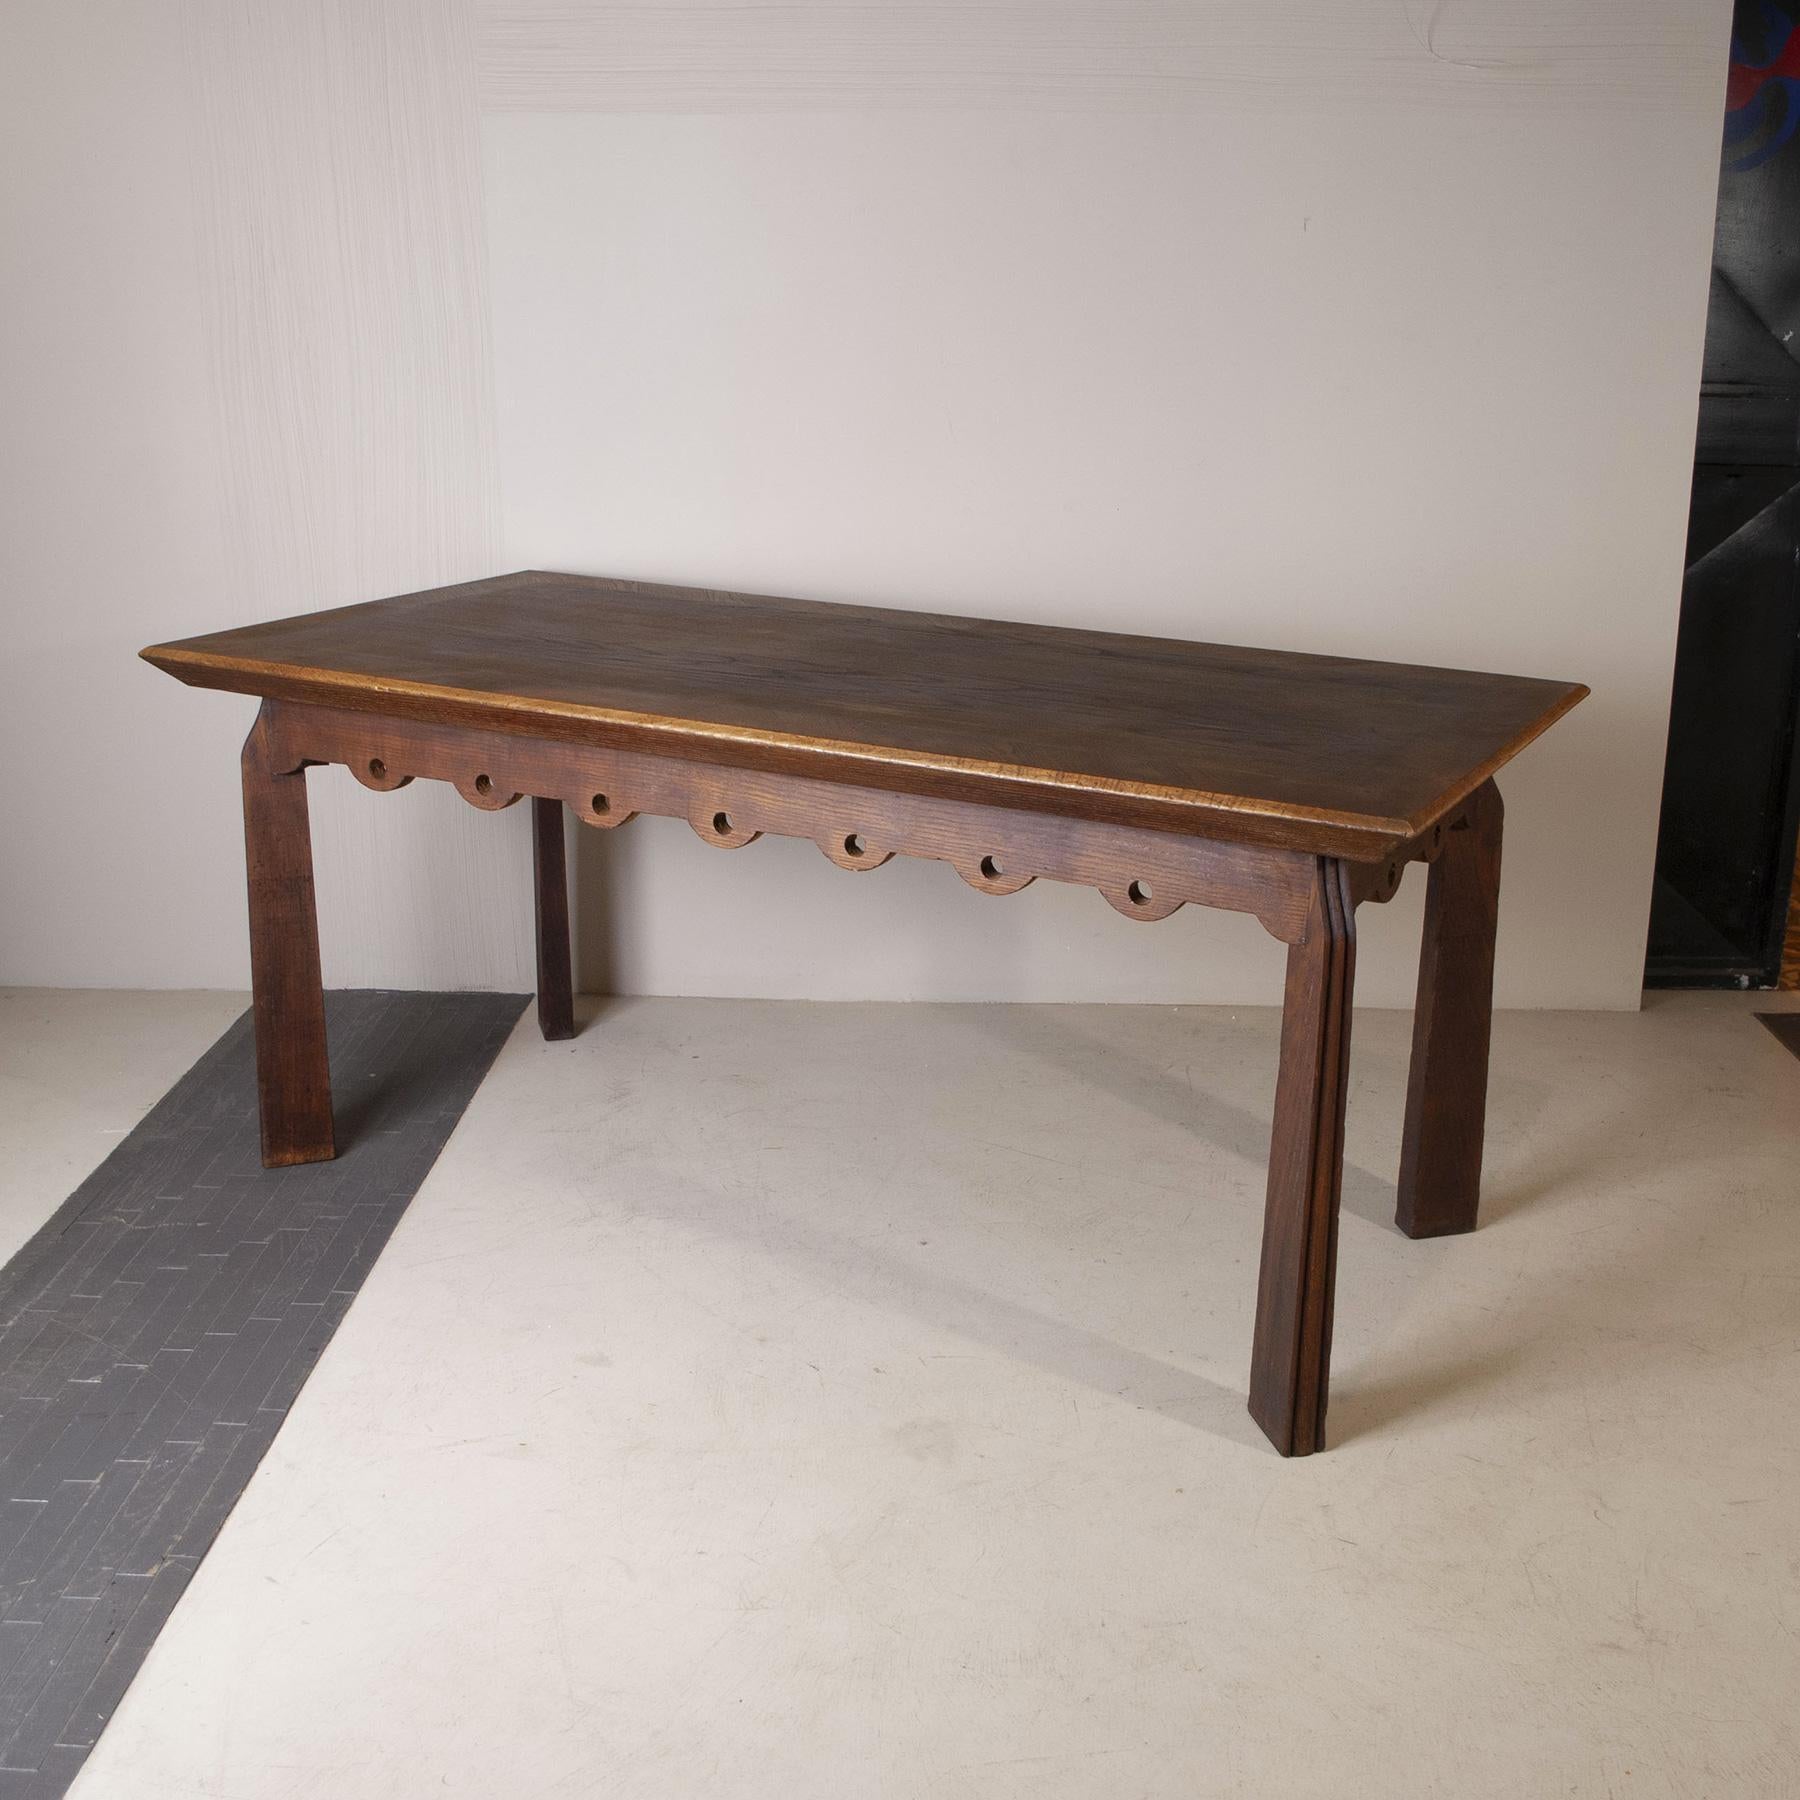 Elegant inlaid and worked wood table attributed to Paolo Buffa's early work late 1940sFurniture by the Milanese architect and designer (1930-1970) is mostly one-of-a-kind pieces, based on the needs of his clients, and therefore always different.